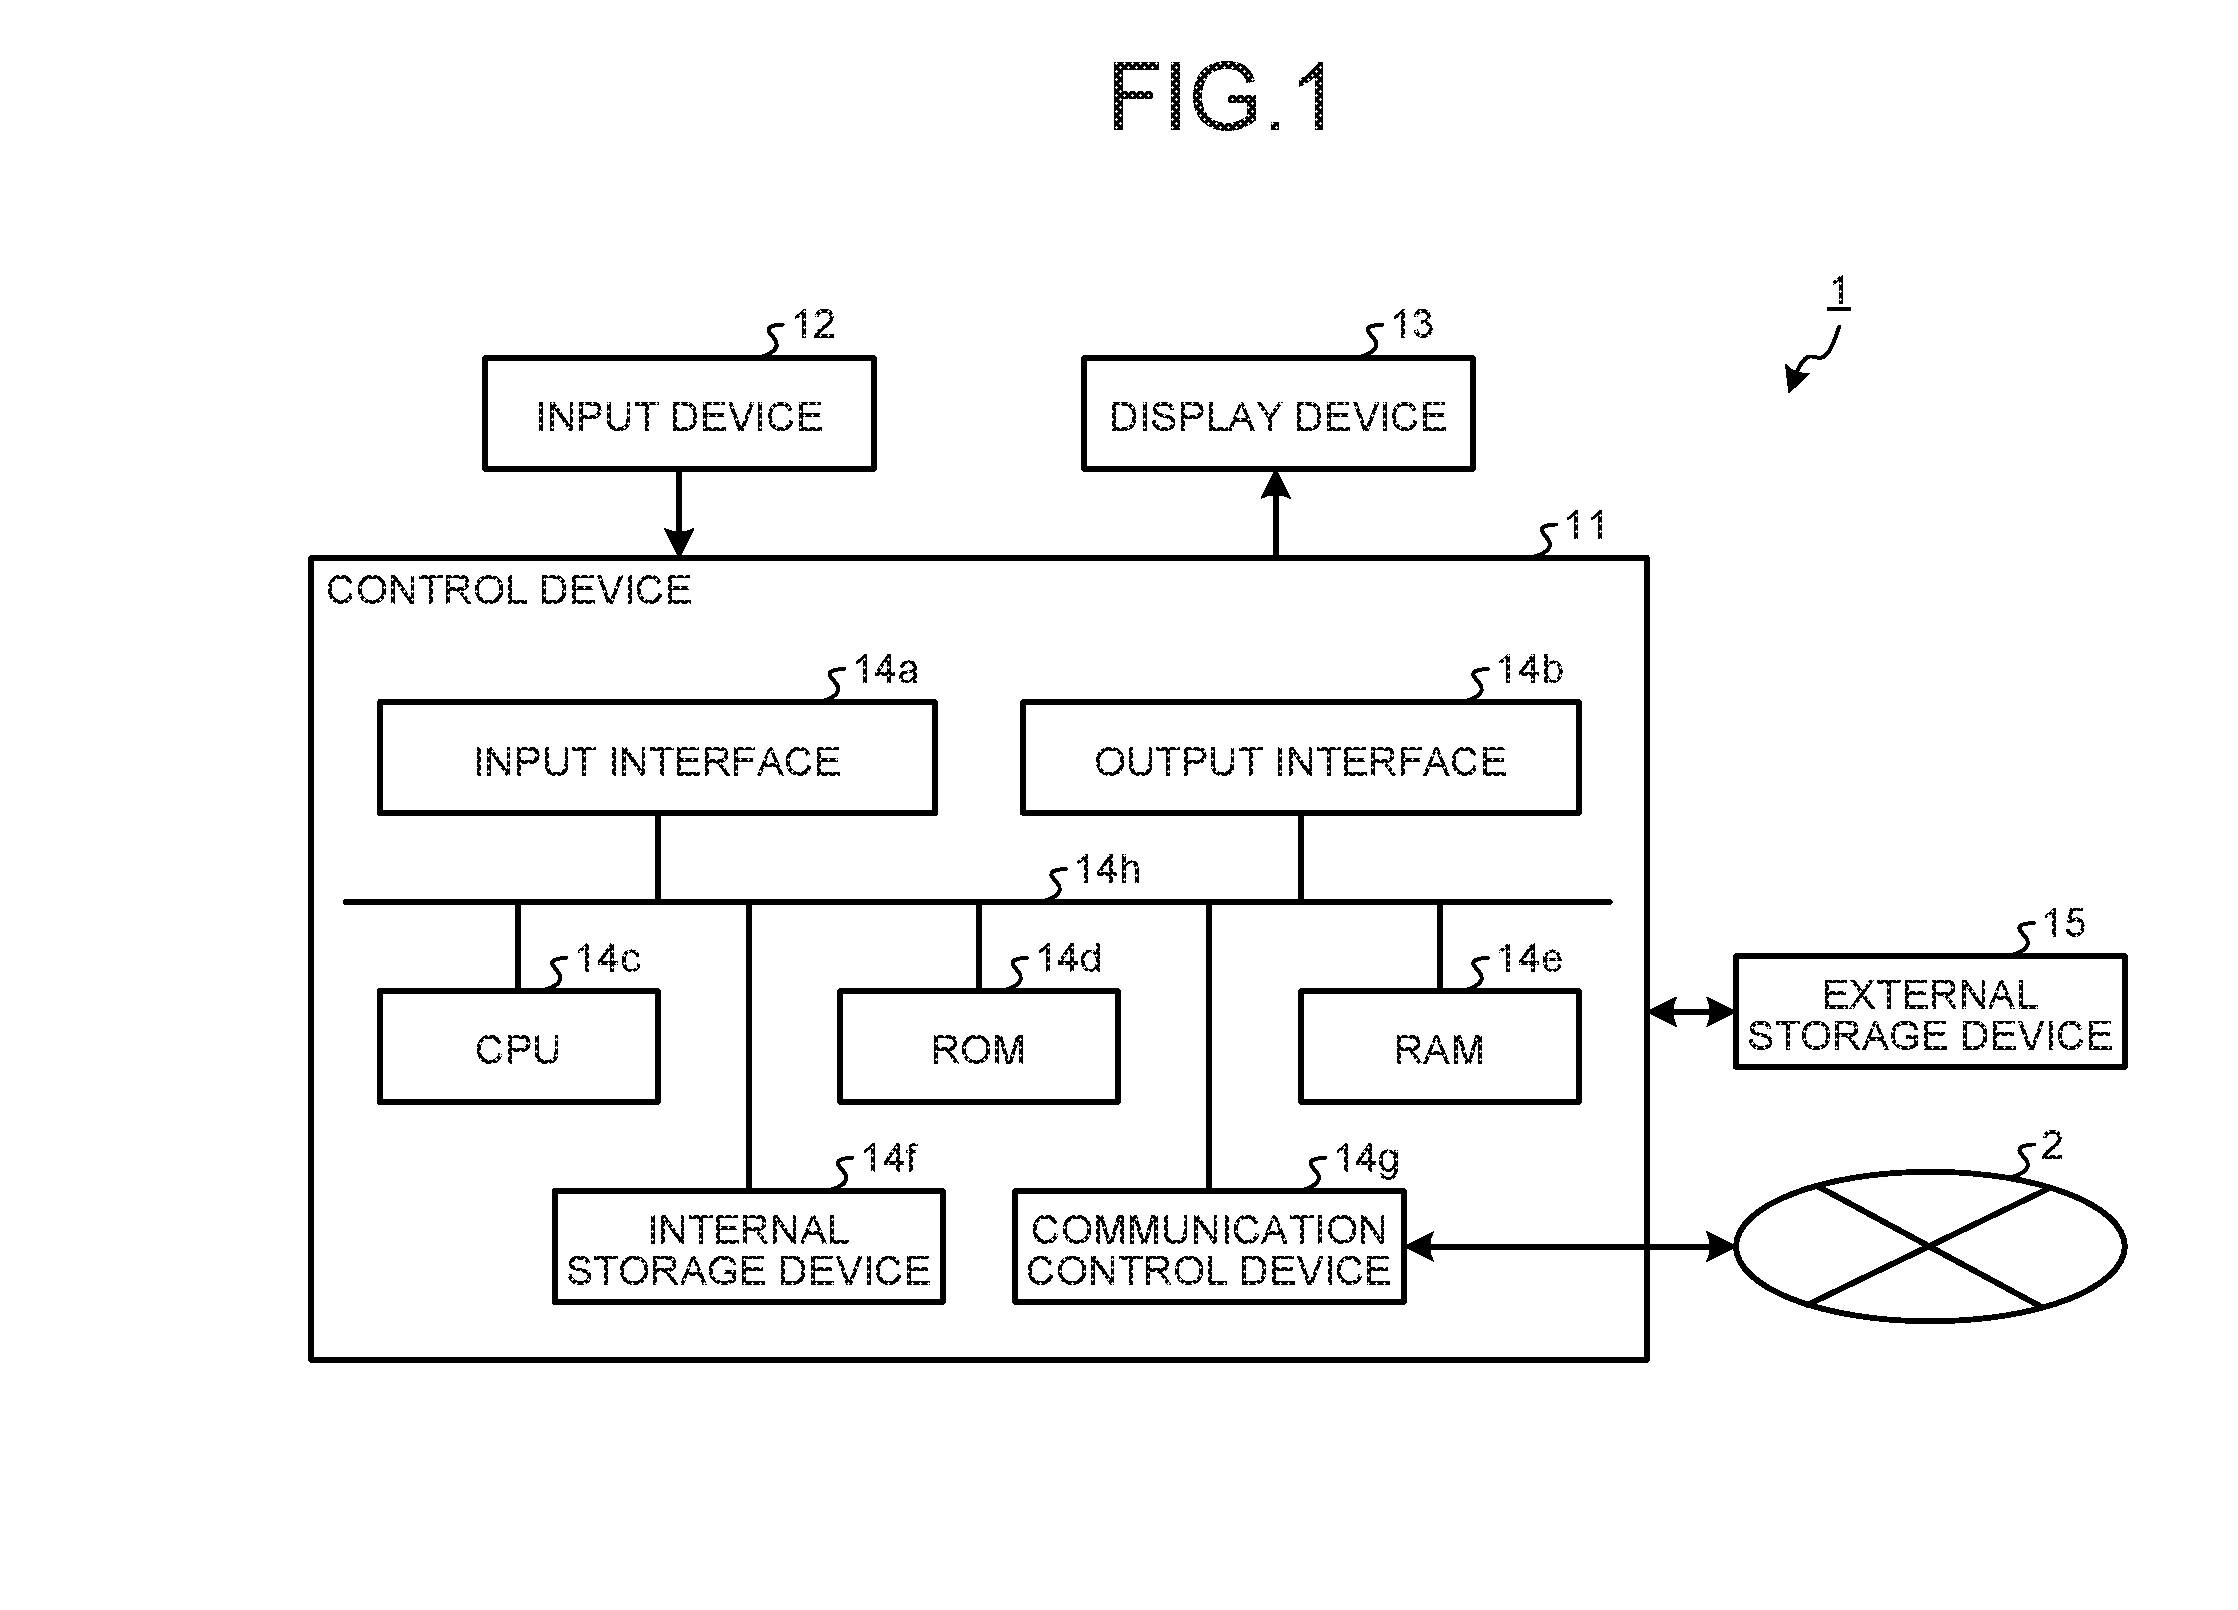 Motor selection device